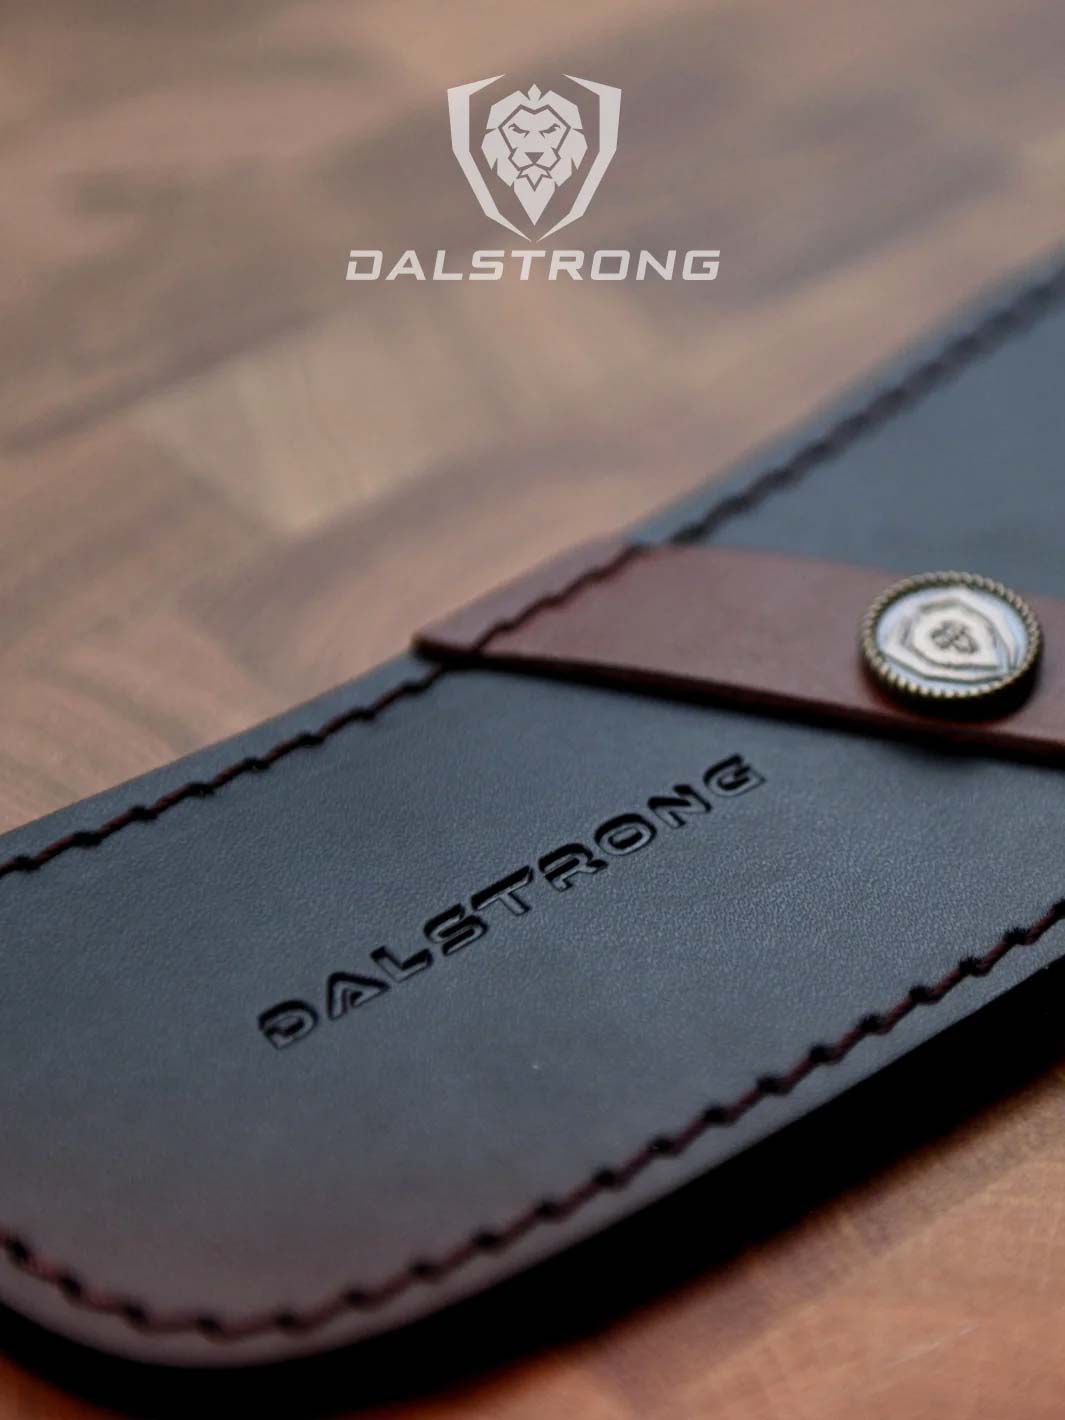 Dalstrong centurion series 7 inch nakiri knife featuring it's black sheath with dalstrong lock pin.